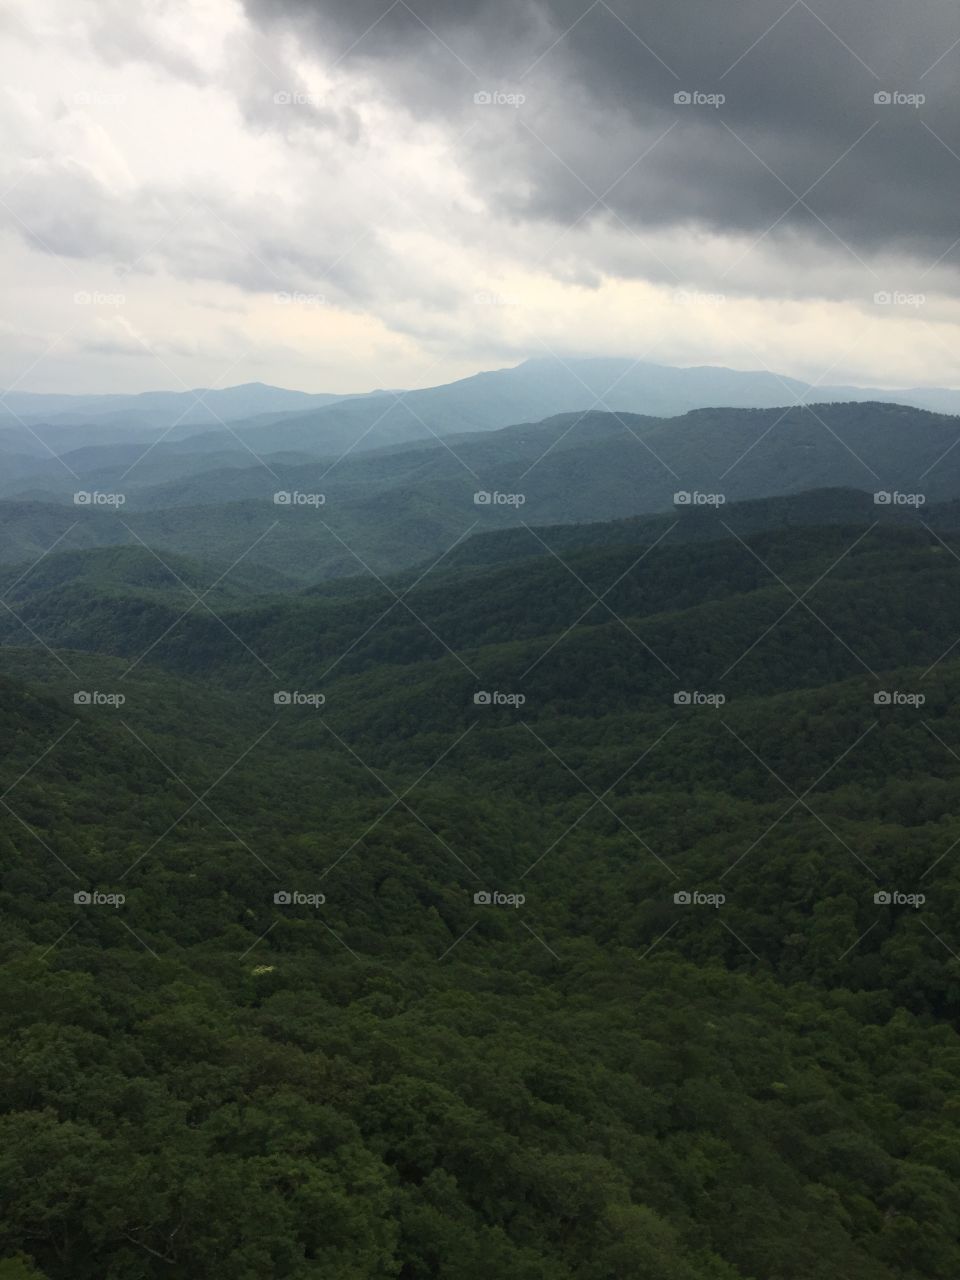 View of horizon from the Blowing Rock in North Carolina!